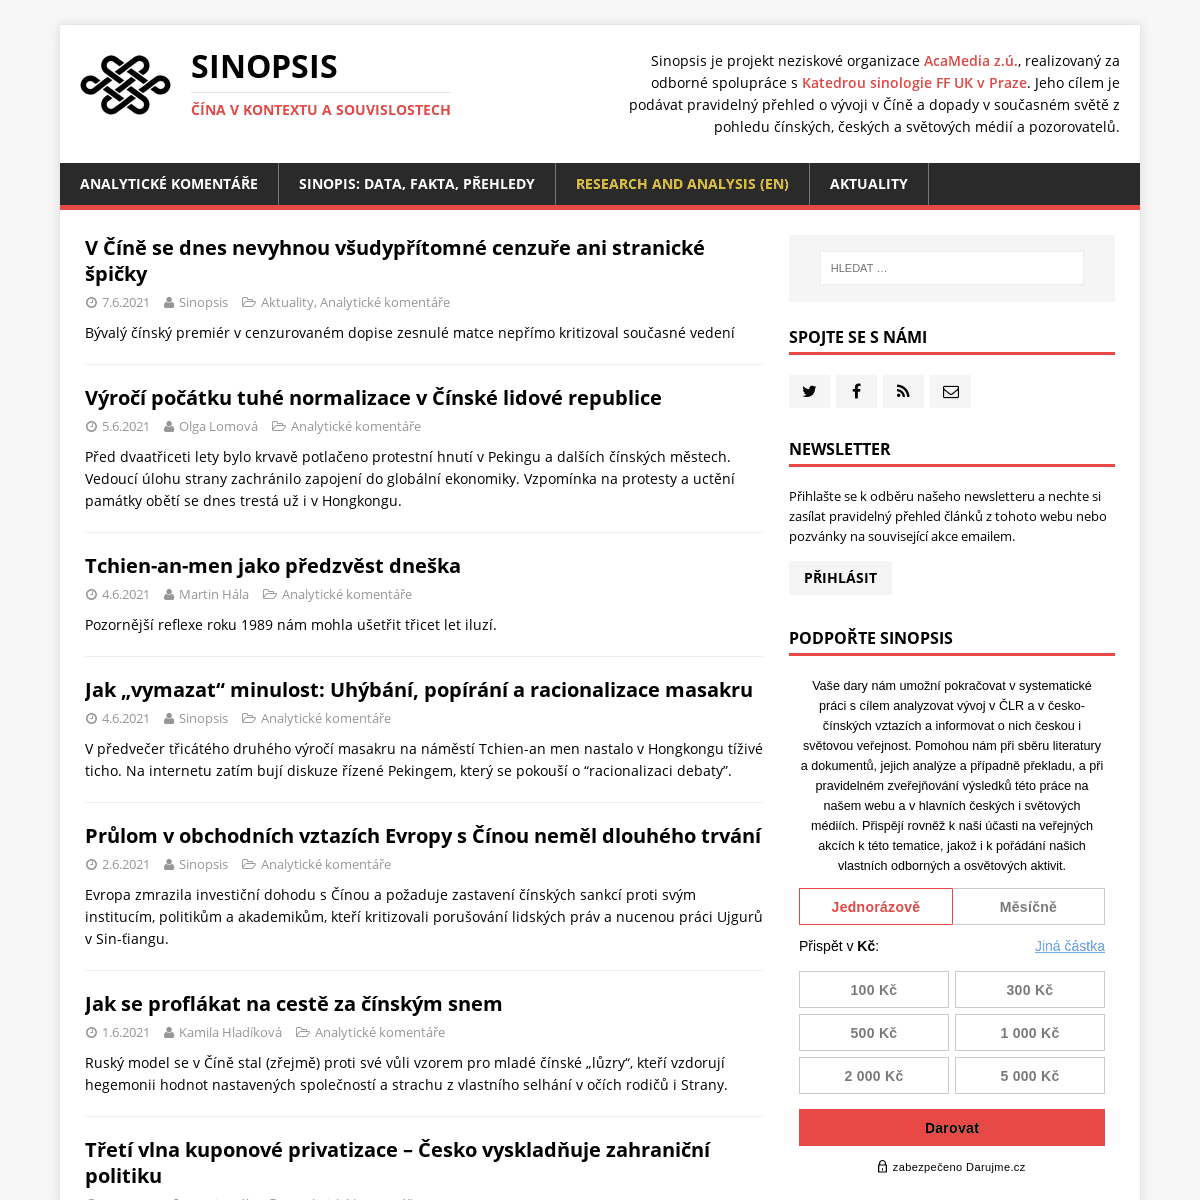 A complete backup of https://sinopsis.cz